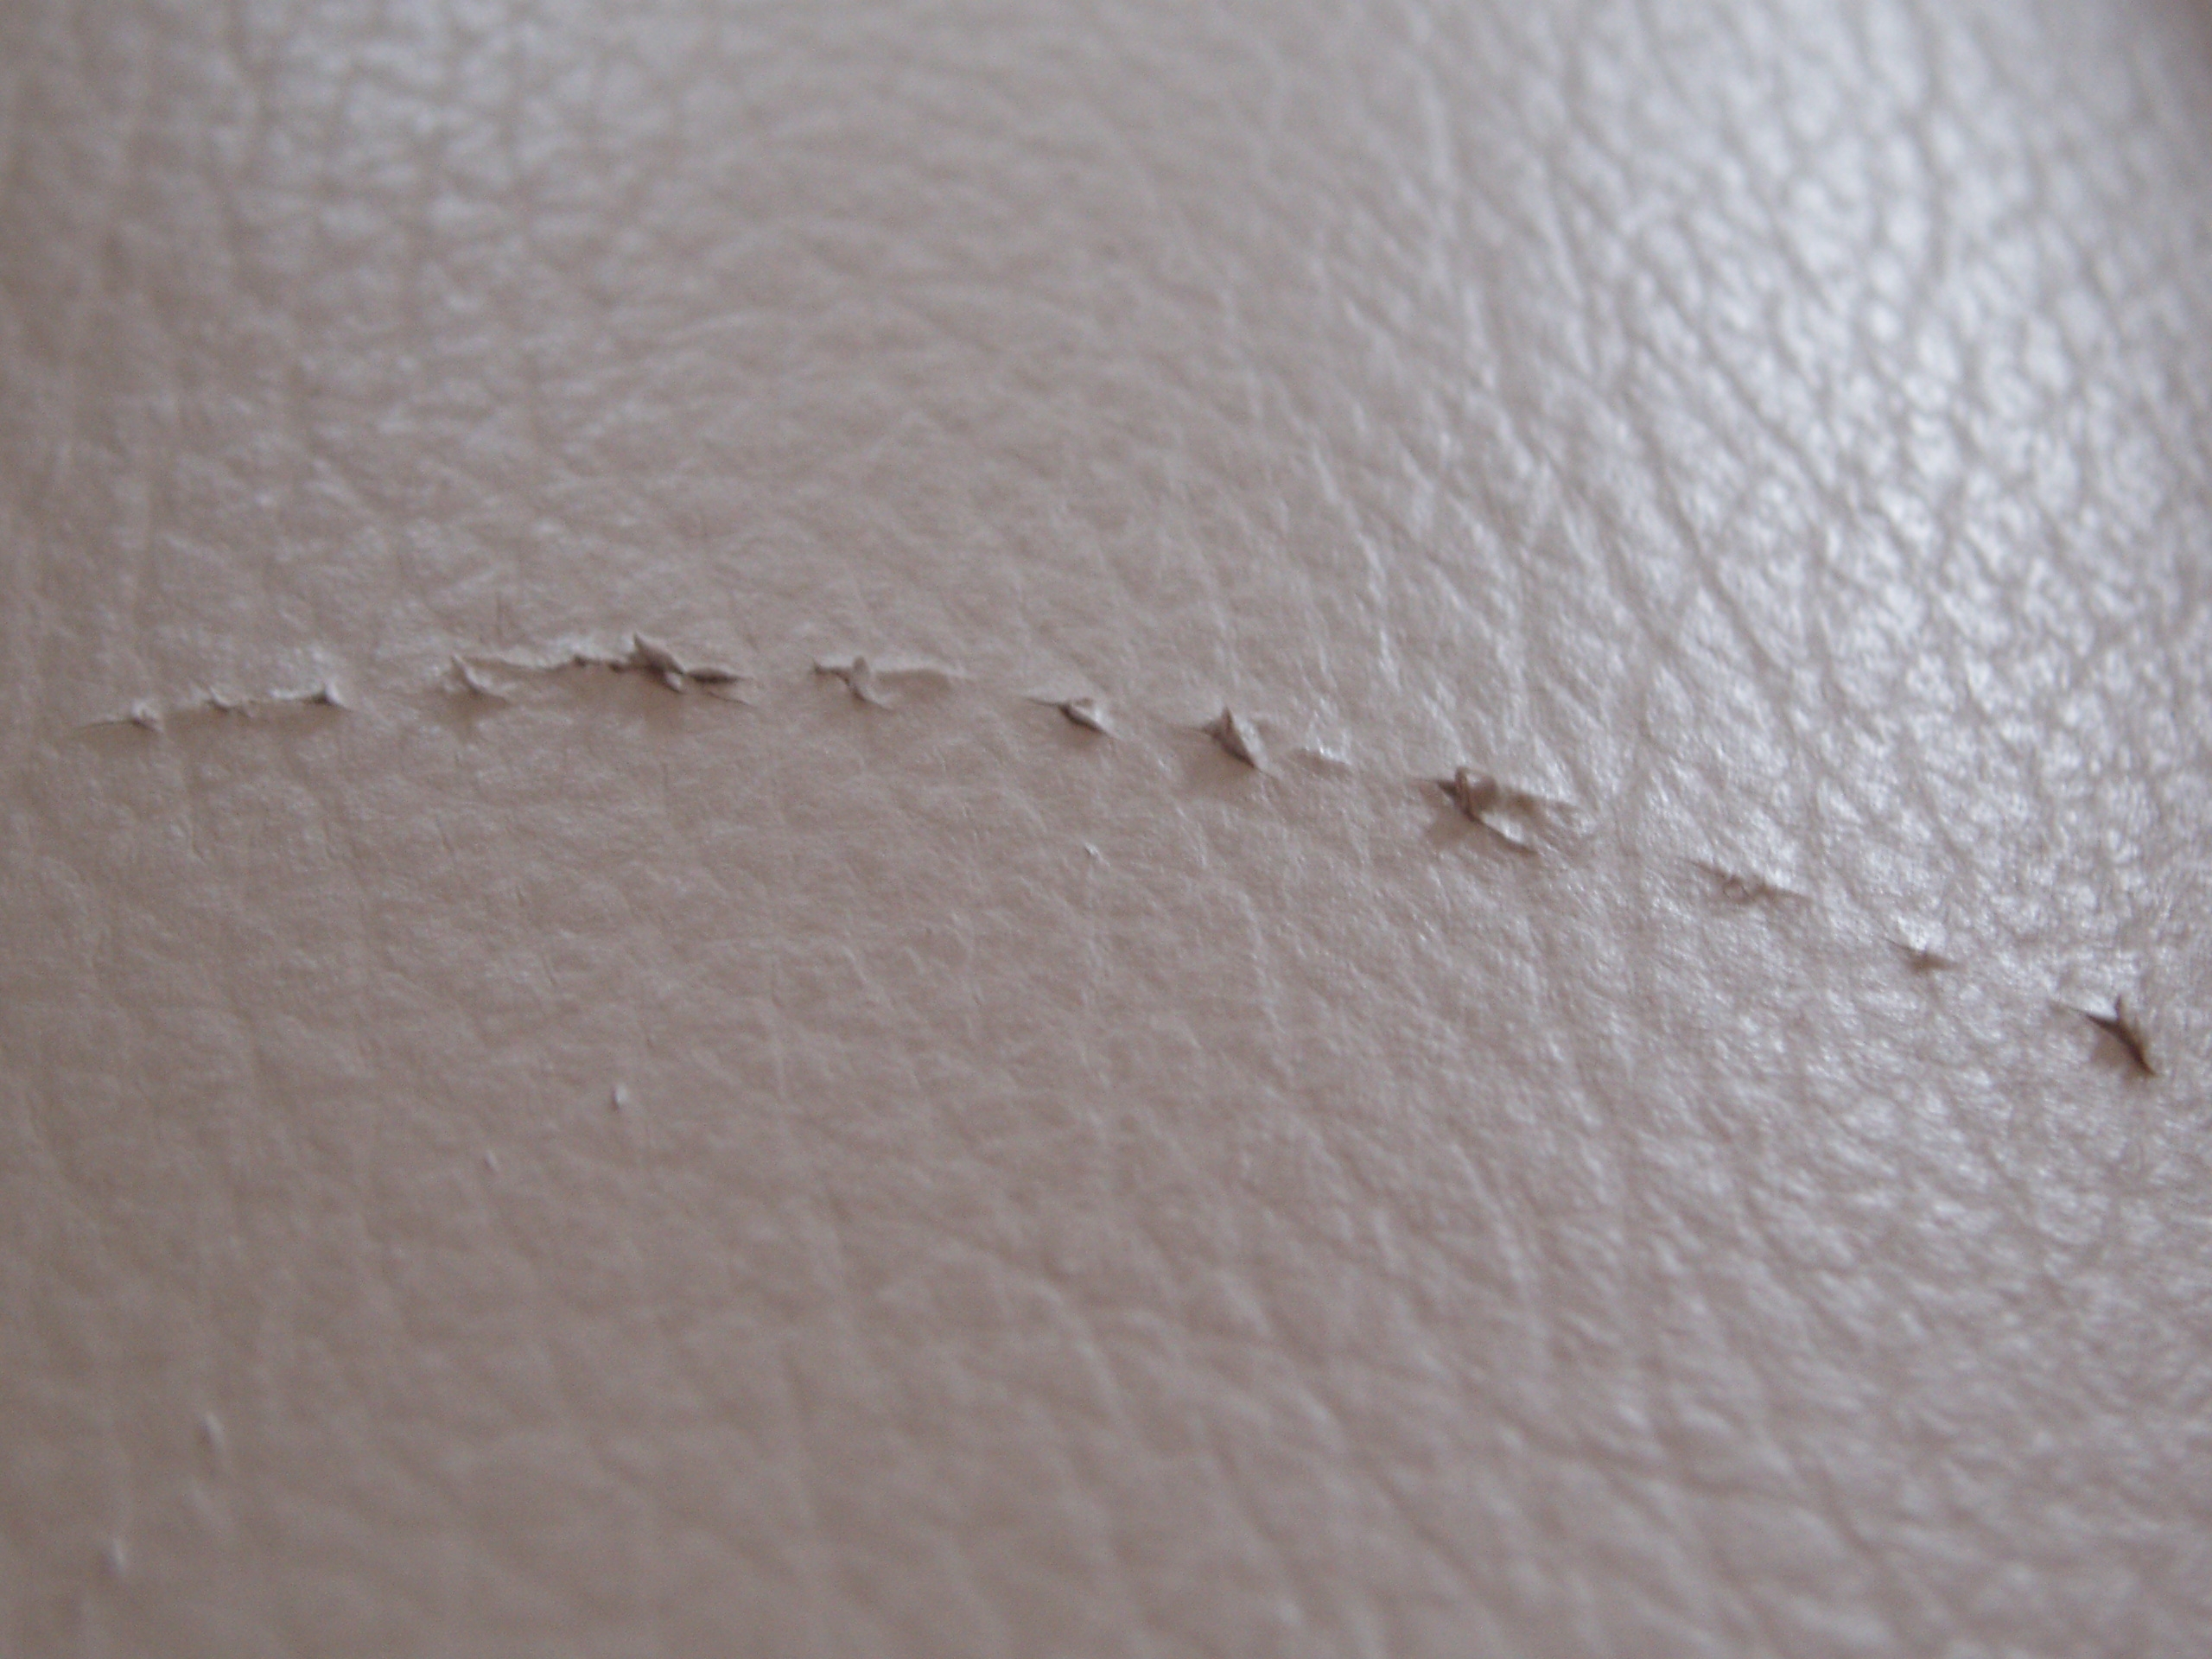 Fix Cat Scratches On Leather Couch, Repair Cat Scratches On Leather Sofa